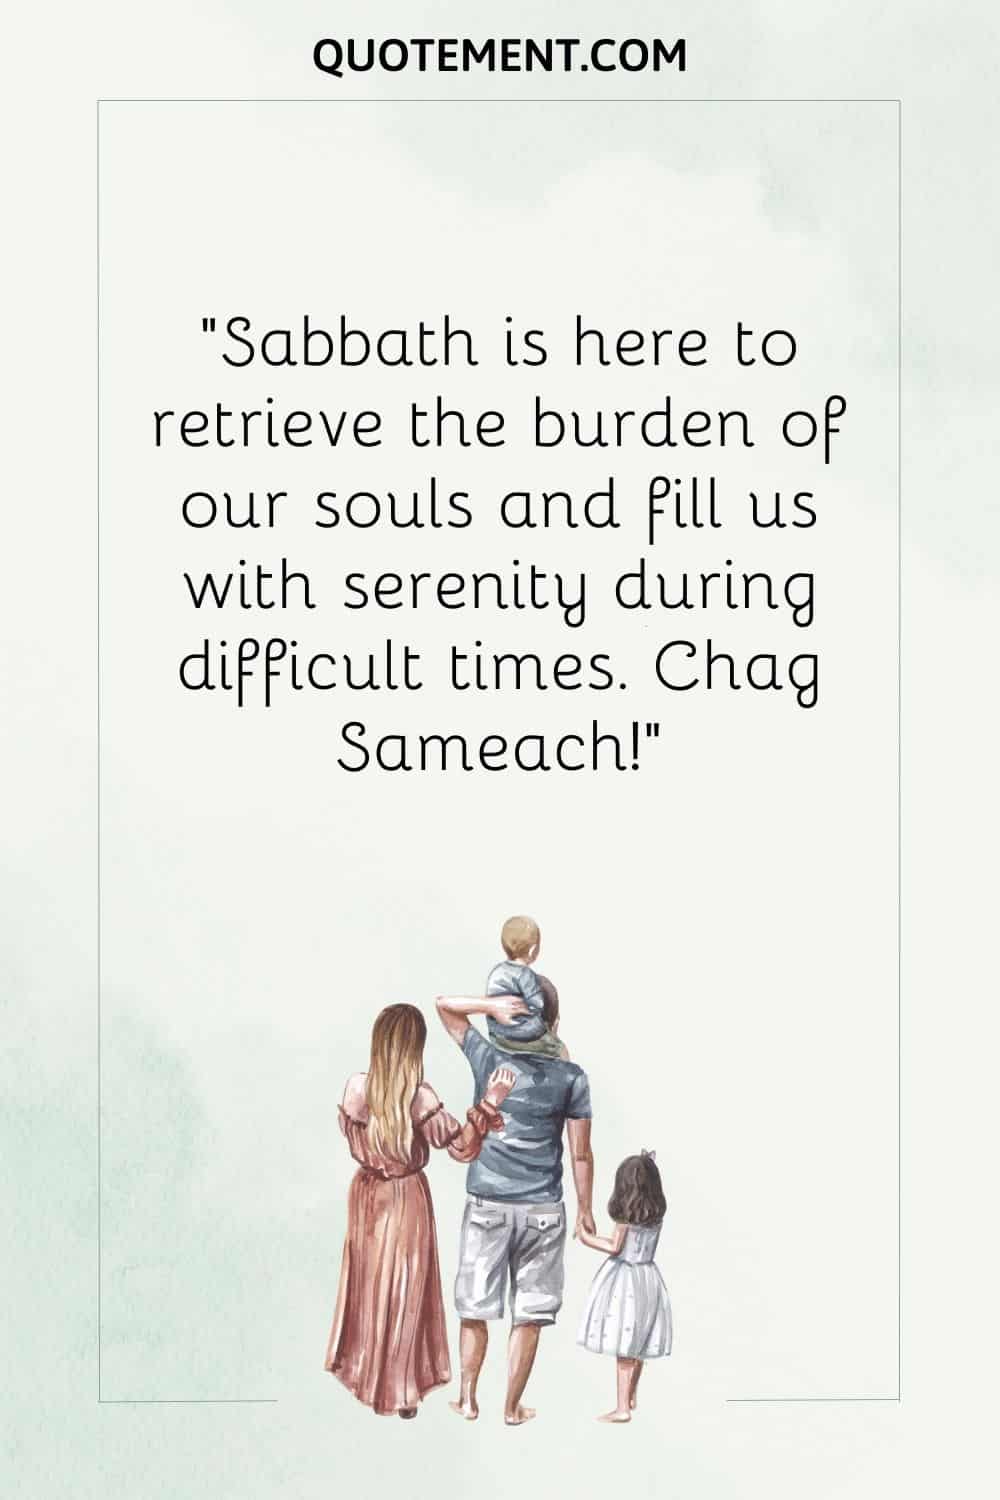 Sabbath is here to retrieve the burden of our souls and fill us with serenity during difficult times